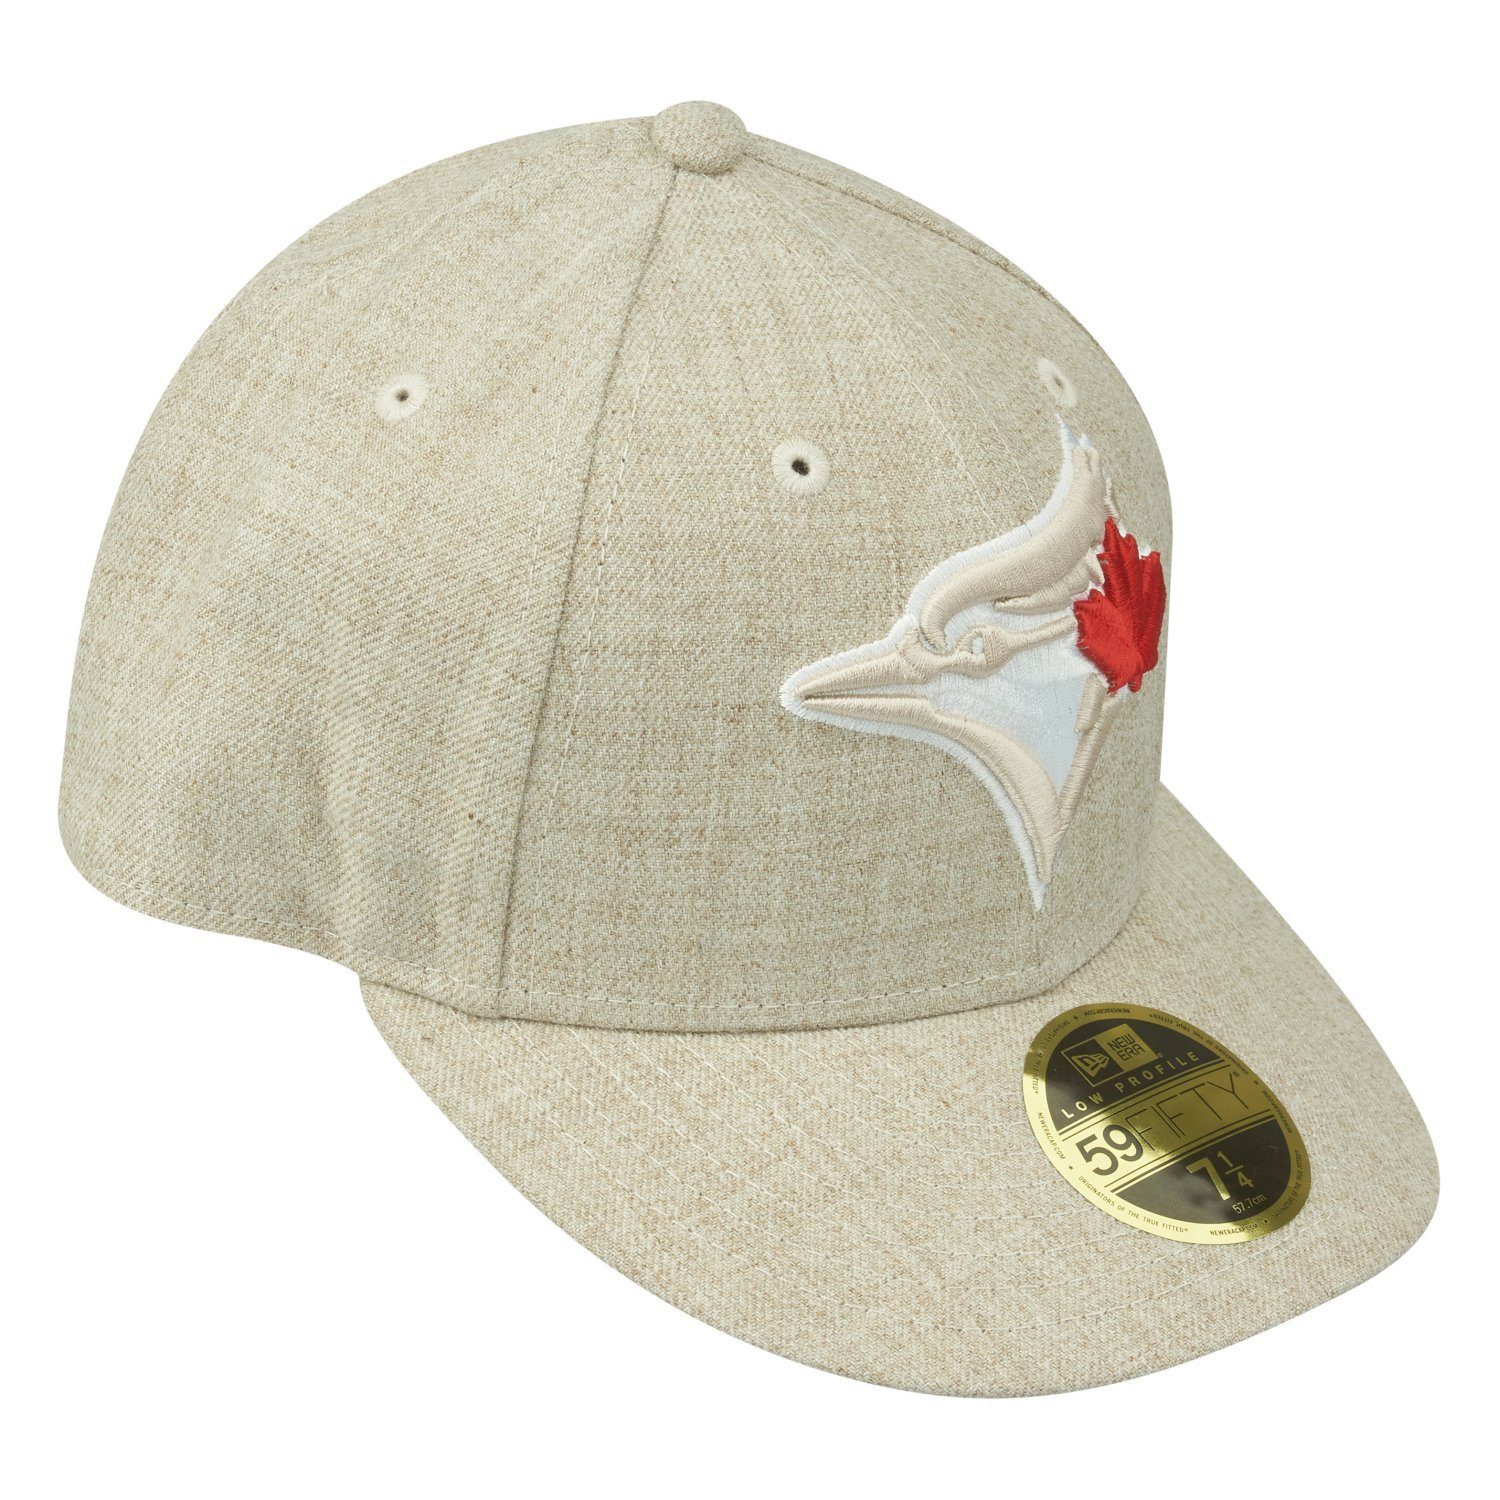 59Fifty Jays oat Era Low Cap Fitted New Toronto Profile